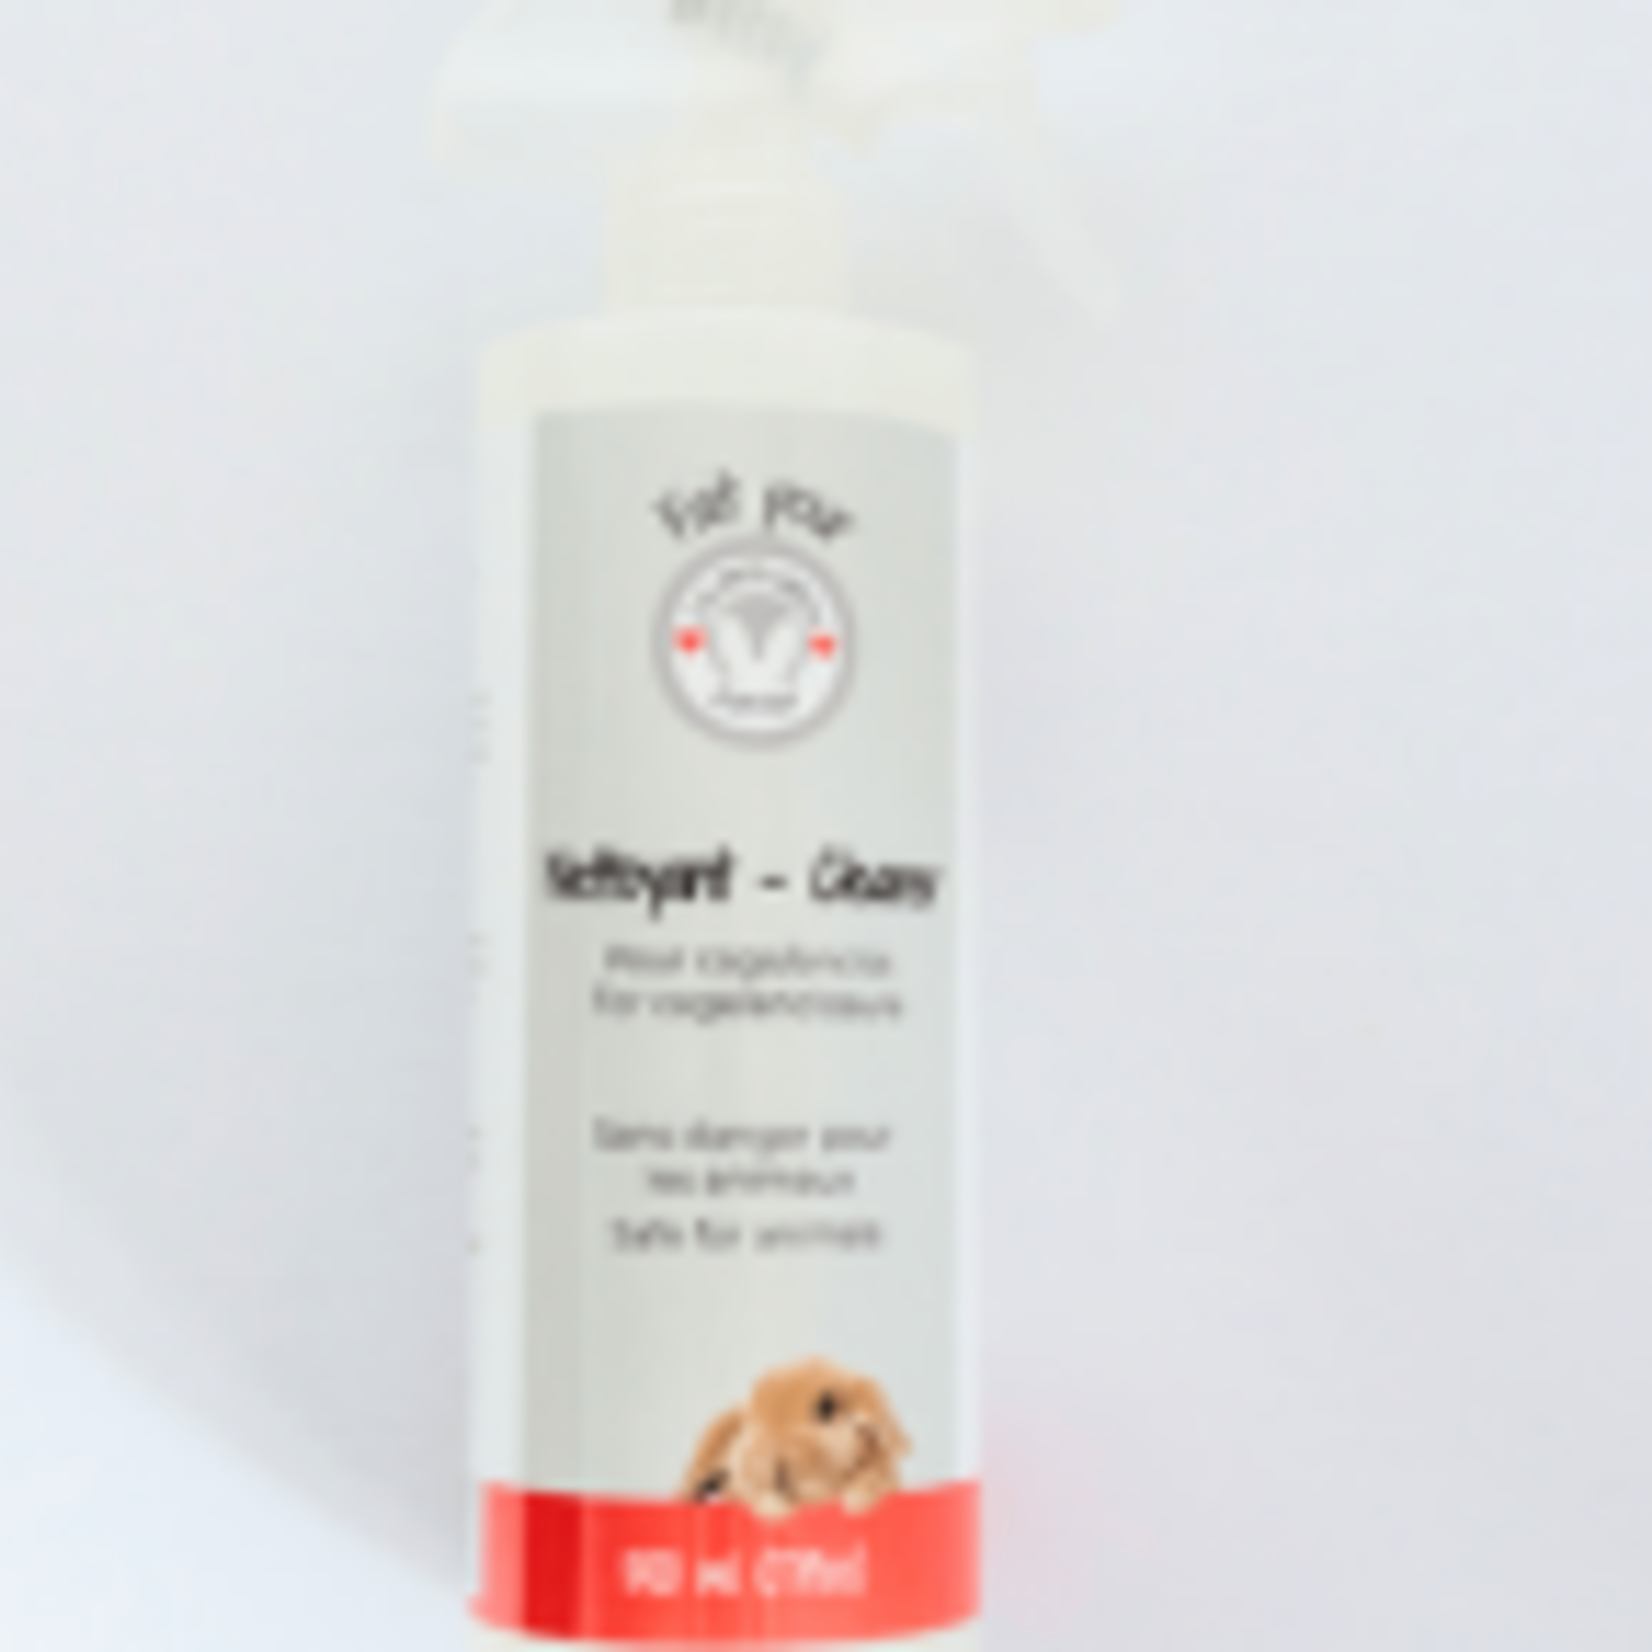 Les Petits Lapins d'Amour Cleaner - for Cage & enclosure - Safe for animals